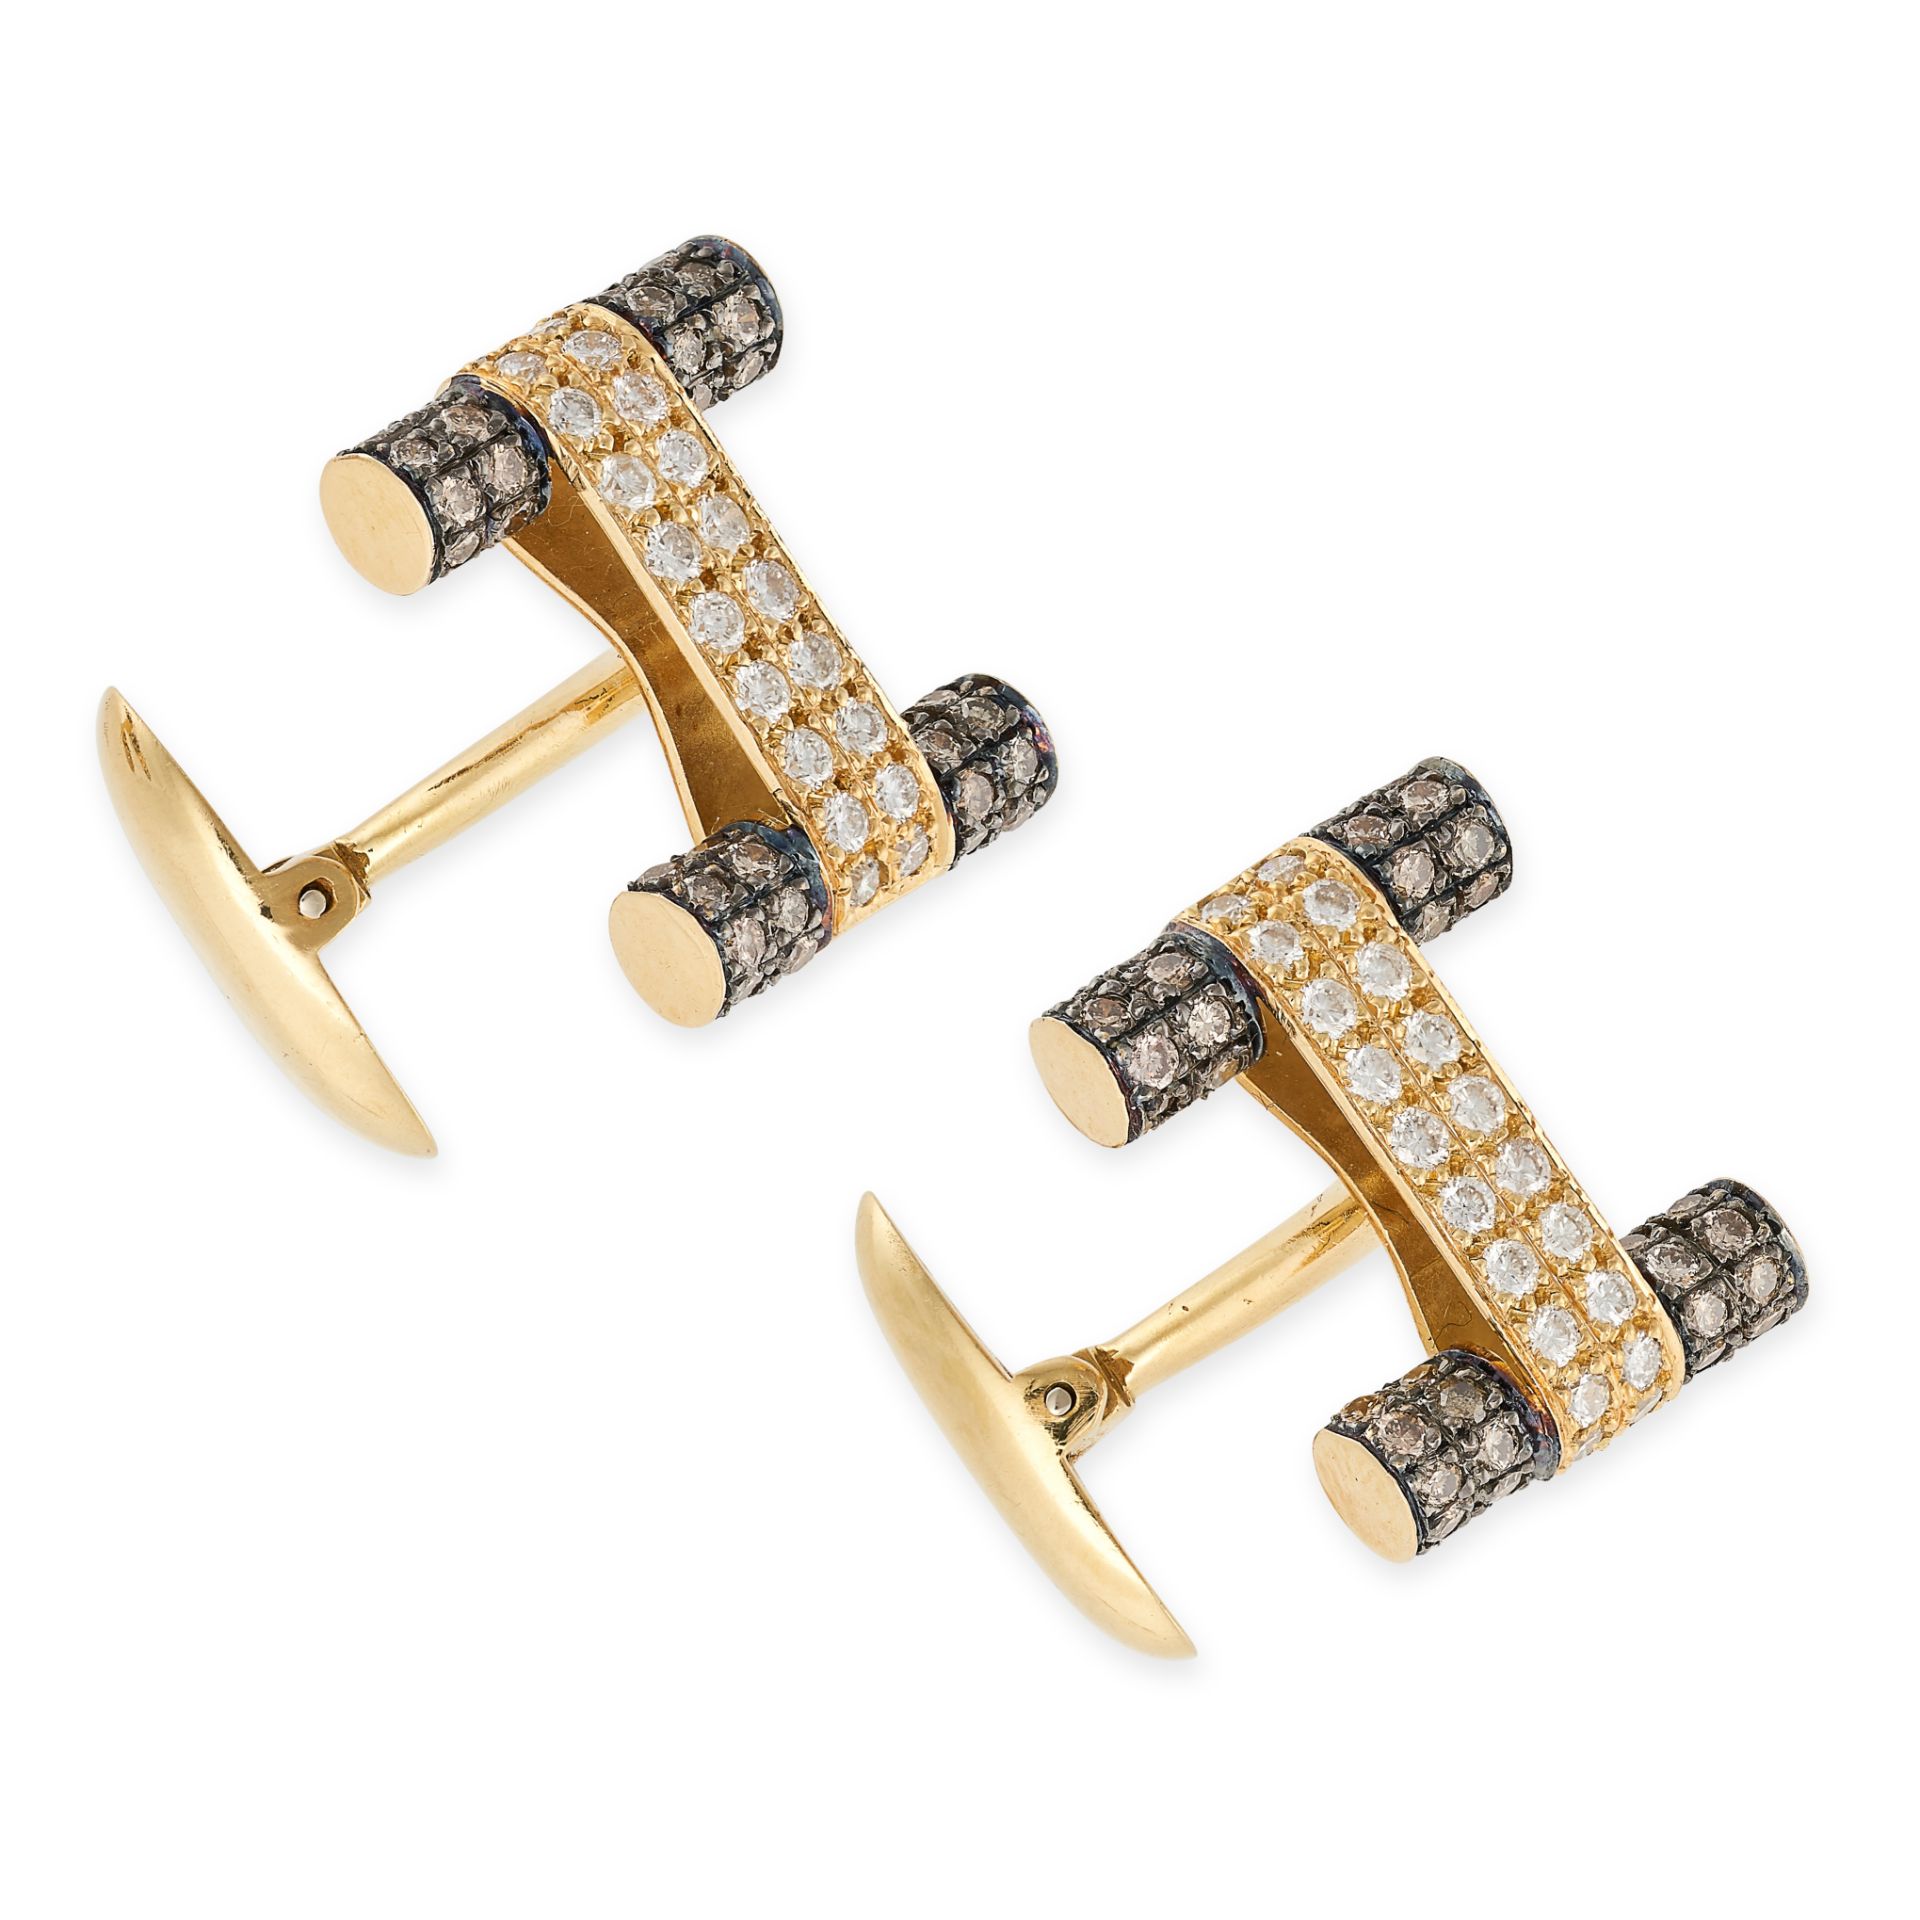 A PAIR OF DIAMOND CUFFLINKS in 18ct yellow gold, designed as two baton links pave set with round cut